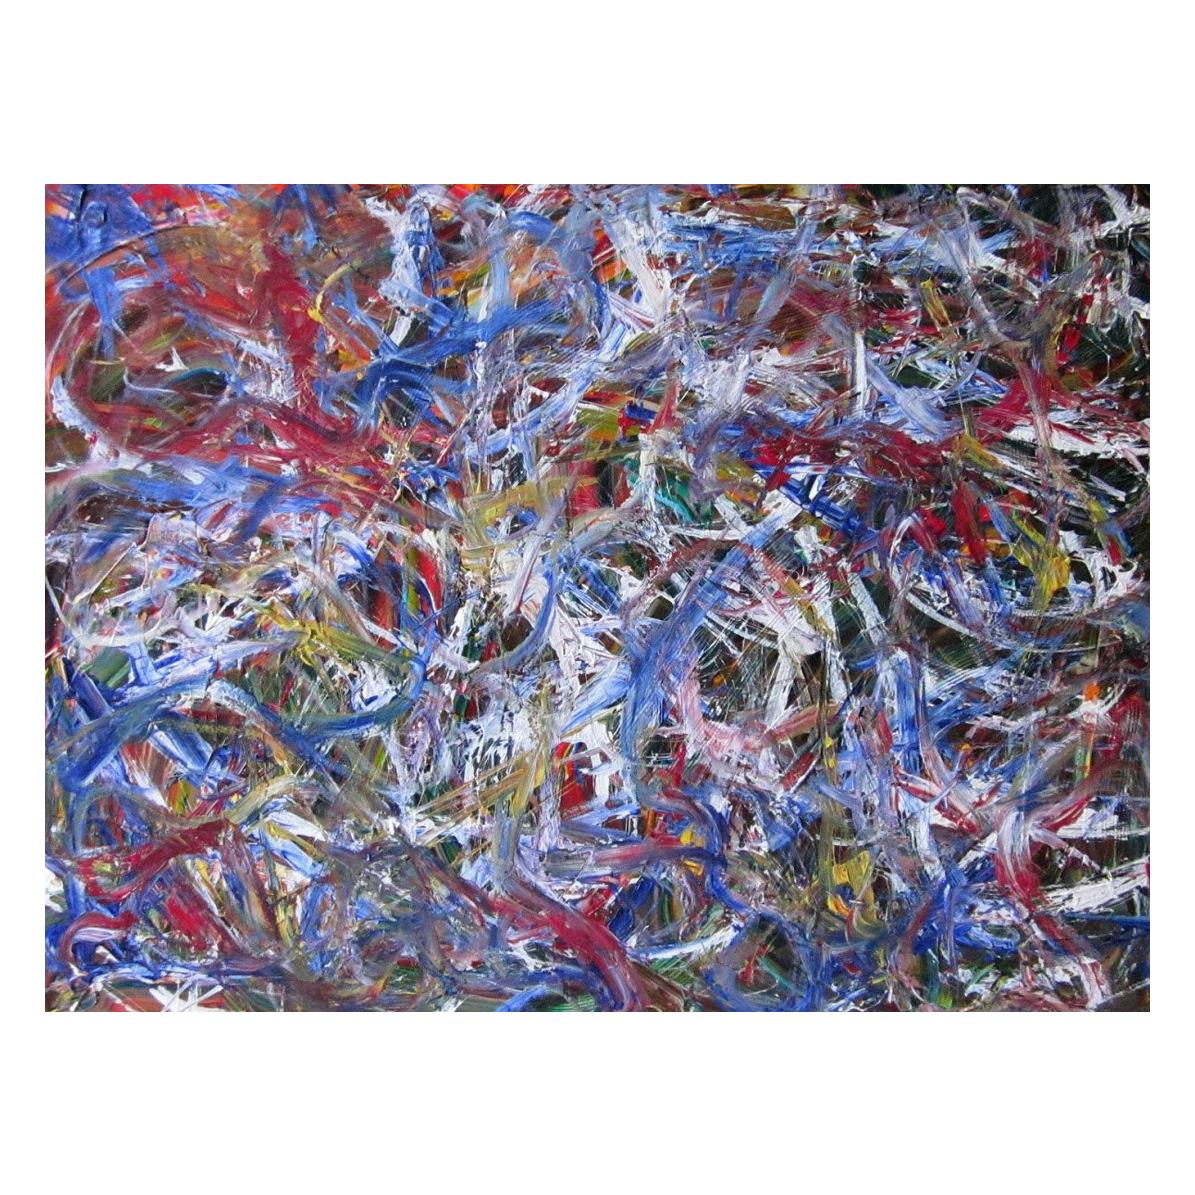 Abstract Acrylic on Canvas Painting "Few Minutes Past Nine" by Alexander Hecht